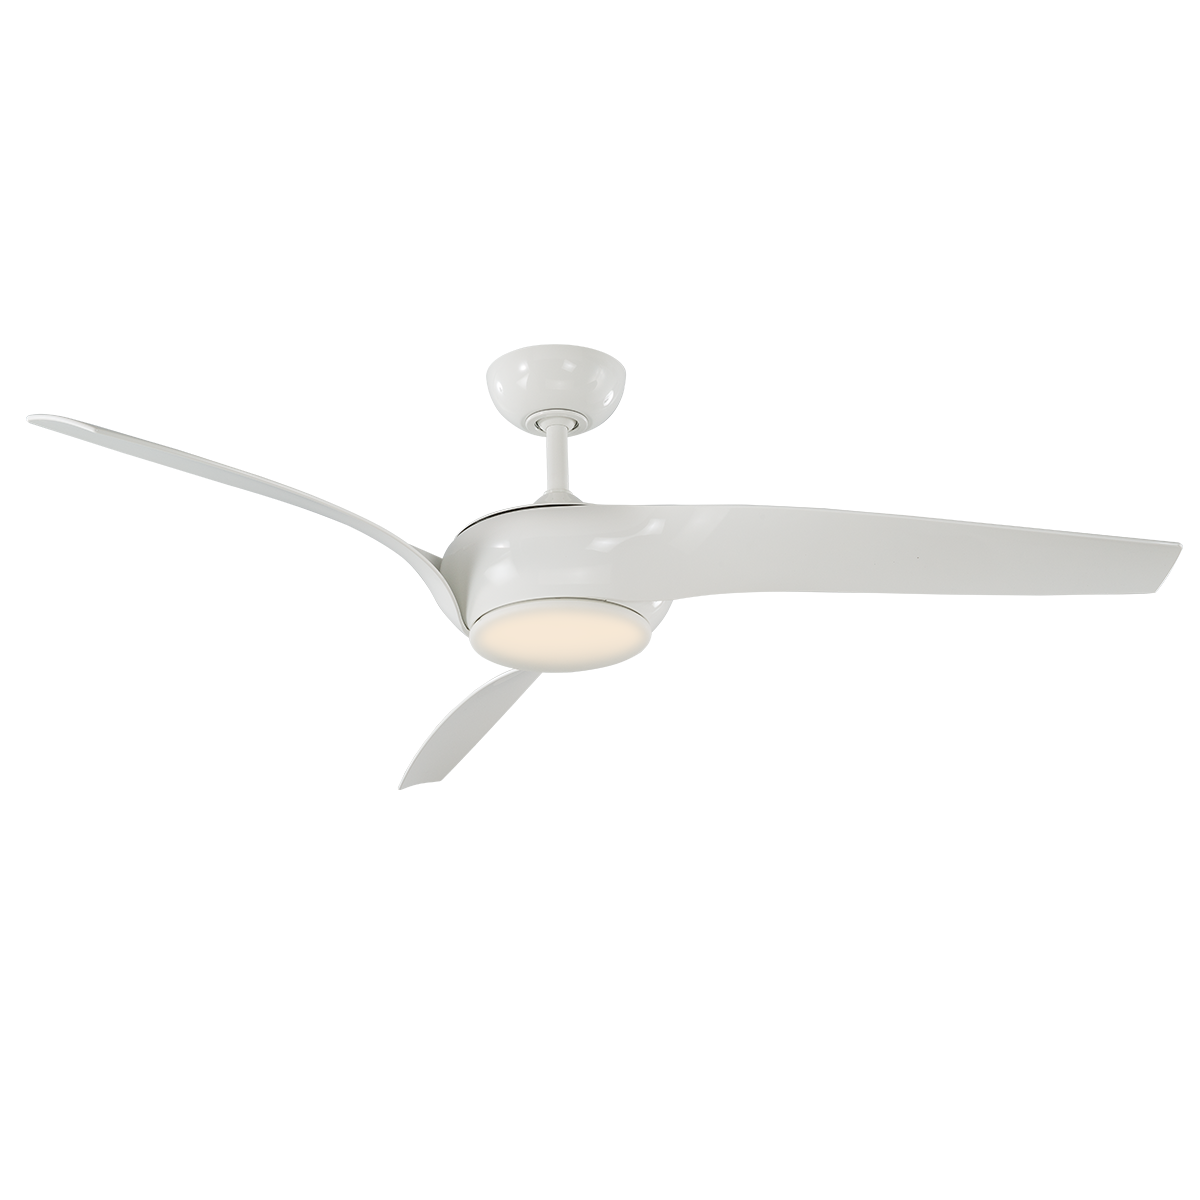 Nirvana Indoor/Outdoor 3-Blade Smart Ceiling Fan 56" with LED Light Kit and Remote Control